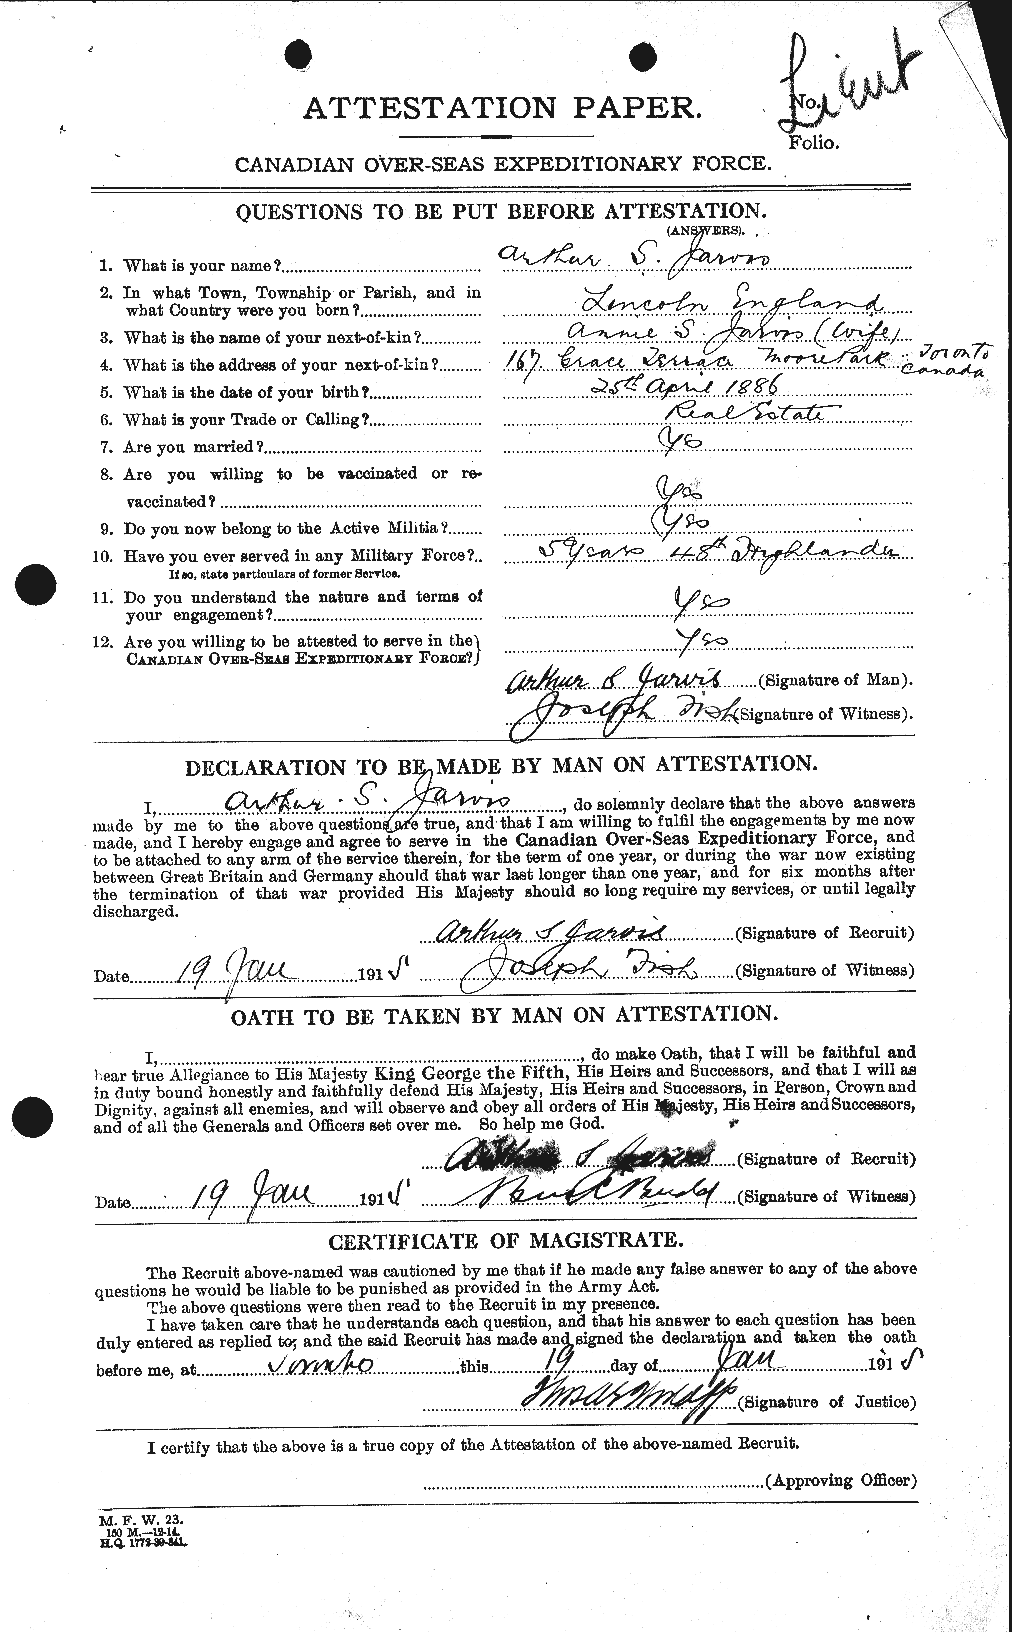 Personnel Records of the First World War - CEF 414646a